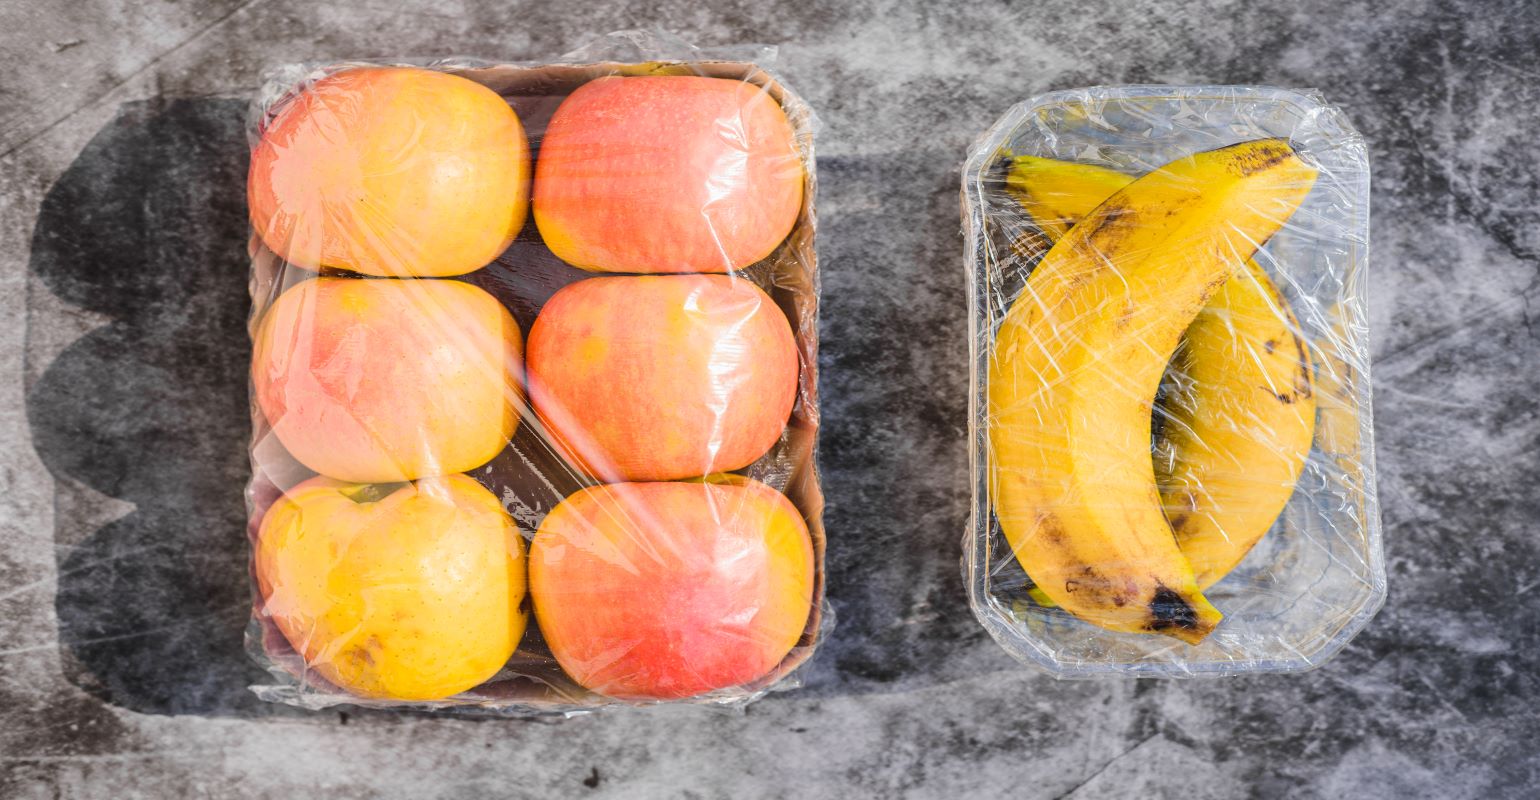 Plastic Wrap Creates More Food Waste, Study Finds